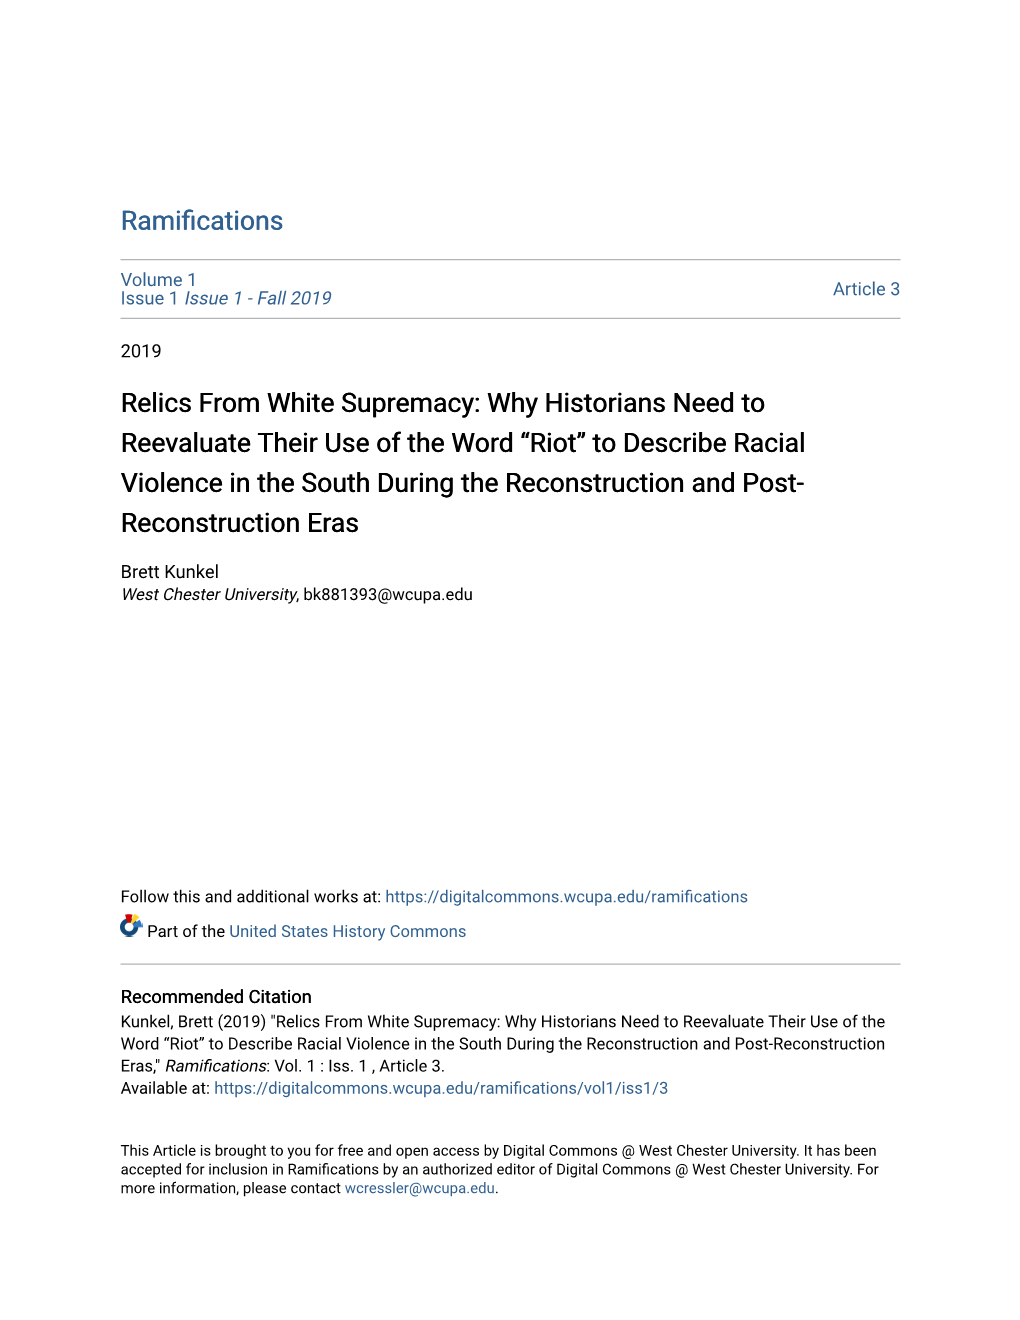 Why Historians Need to Reevaluate Their Use of the Word “Riot” to Describe Racial Violence in the South During the Reconstruction and Post- Reconstruction Eras